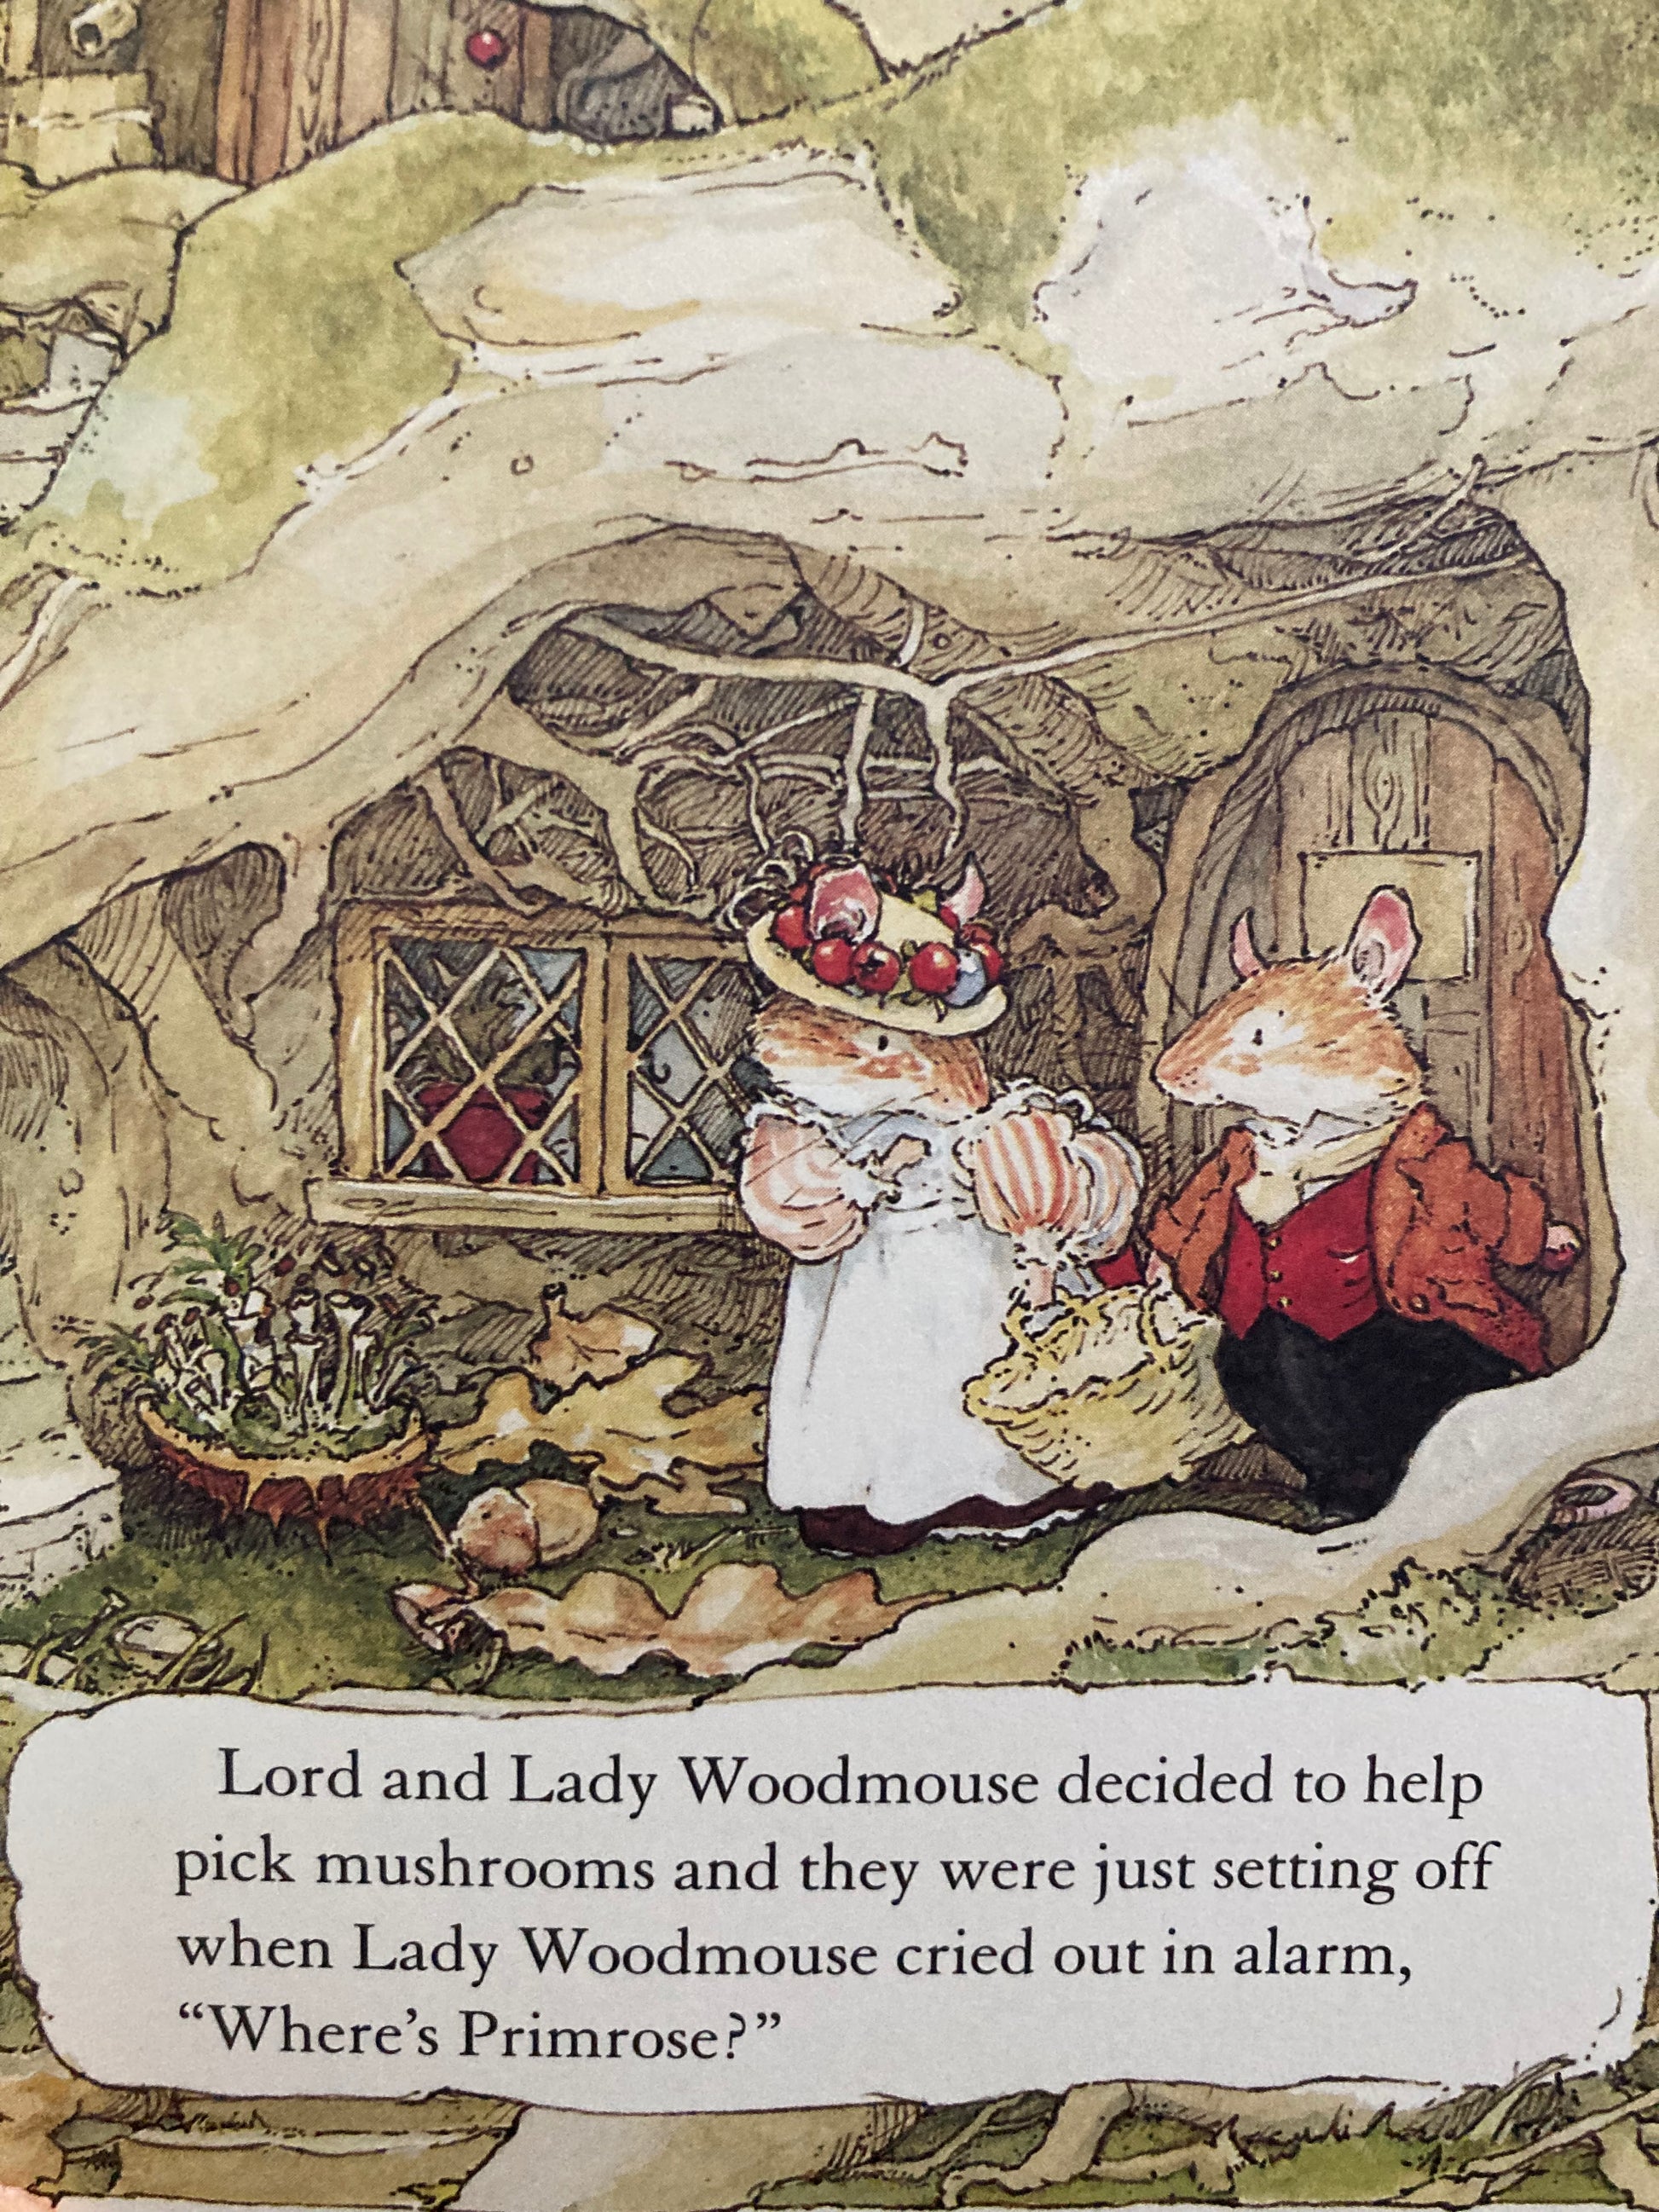 Brambly Hedge on X: Time to gather round the fire. Illustration